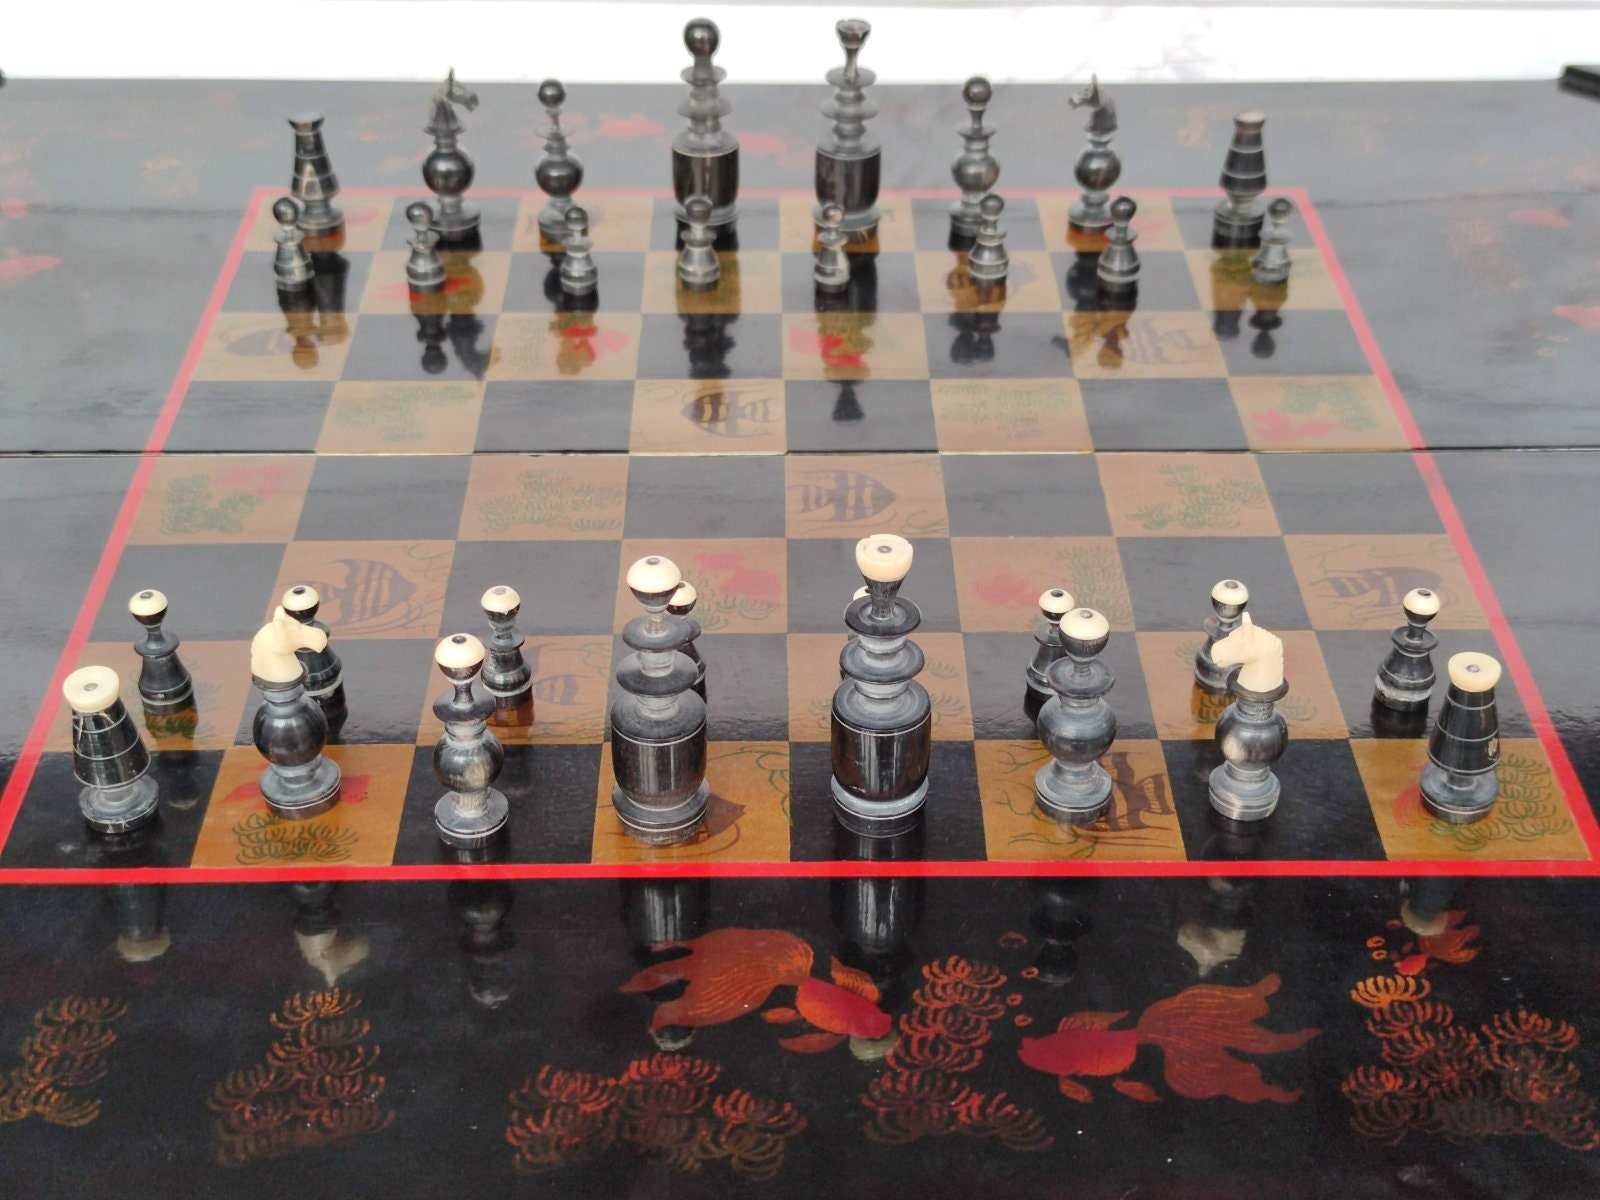 Vietnamese Handmade Wood Lacquer Chess Set with Carved Stone Pieces from  Vietnam